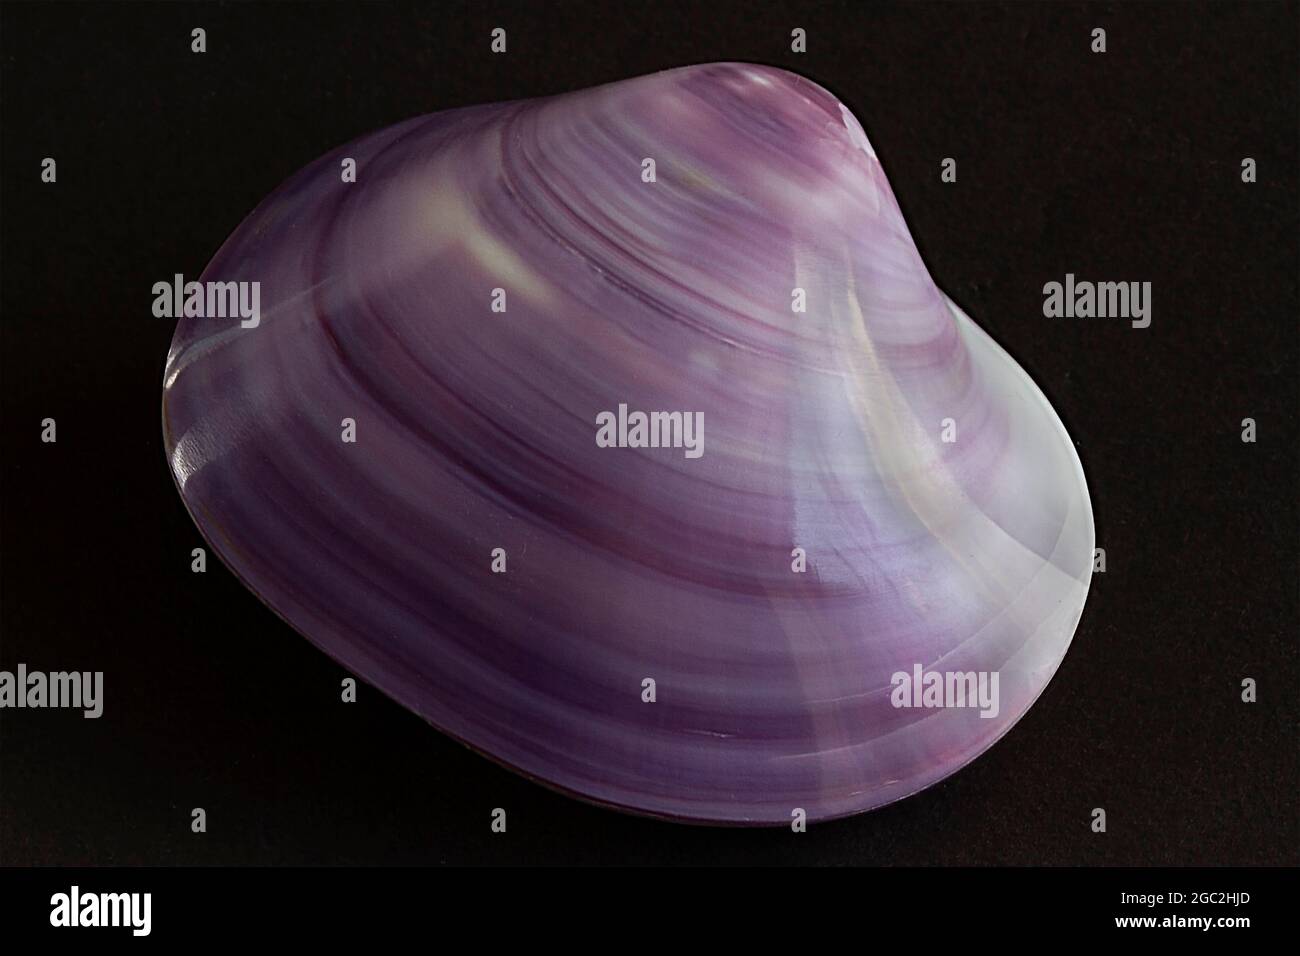 The Violet Clam originated in the Far East but had become relatively common around Vancouver on the West Coast. Stock Photo